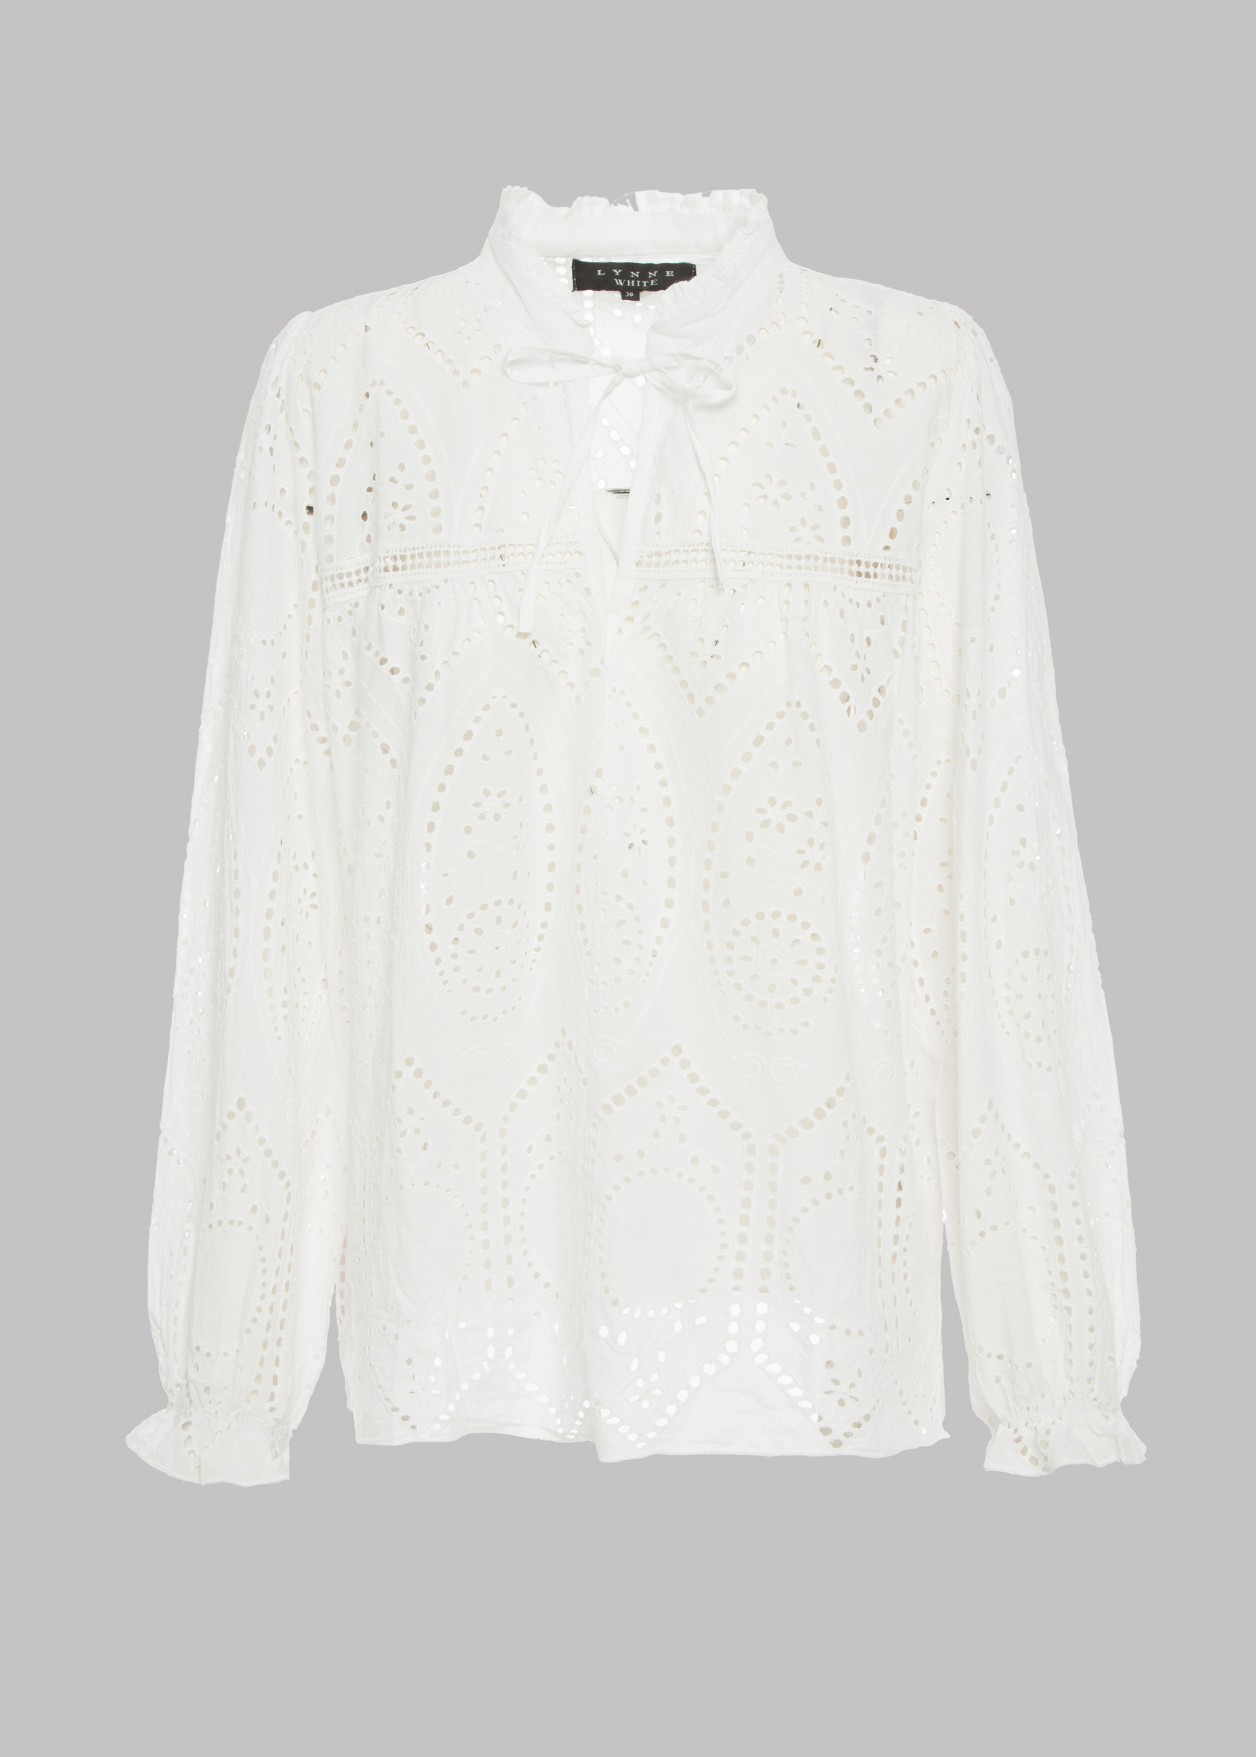 Broderie long sleeve blouse